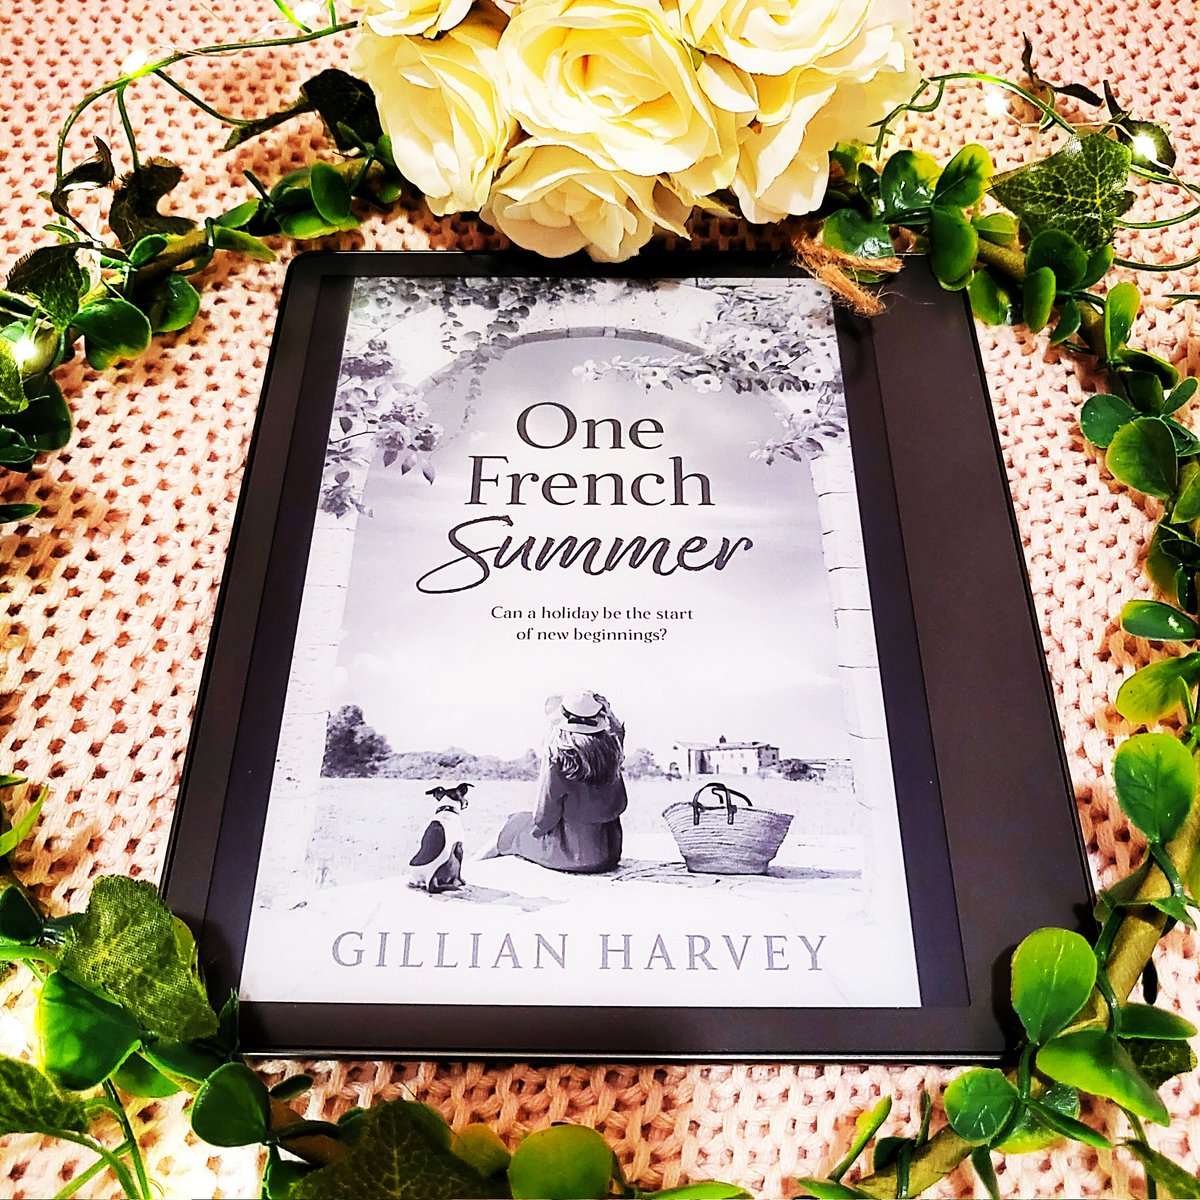 My #bookreview of #OneFrenchSummer by @GillPlusFive is now on my blog! @BoldwoodBooks This was also @Squadpod3 #RomanceRocks choice for February! 😊 ❤️ 

kirstysbookbuyingaddiction.home.blog/2023/02/16/one…

#bookreview #BookRecommendation #RespectRomFic #RomanceRocks